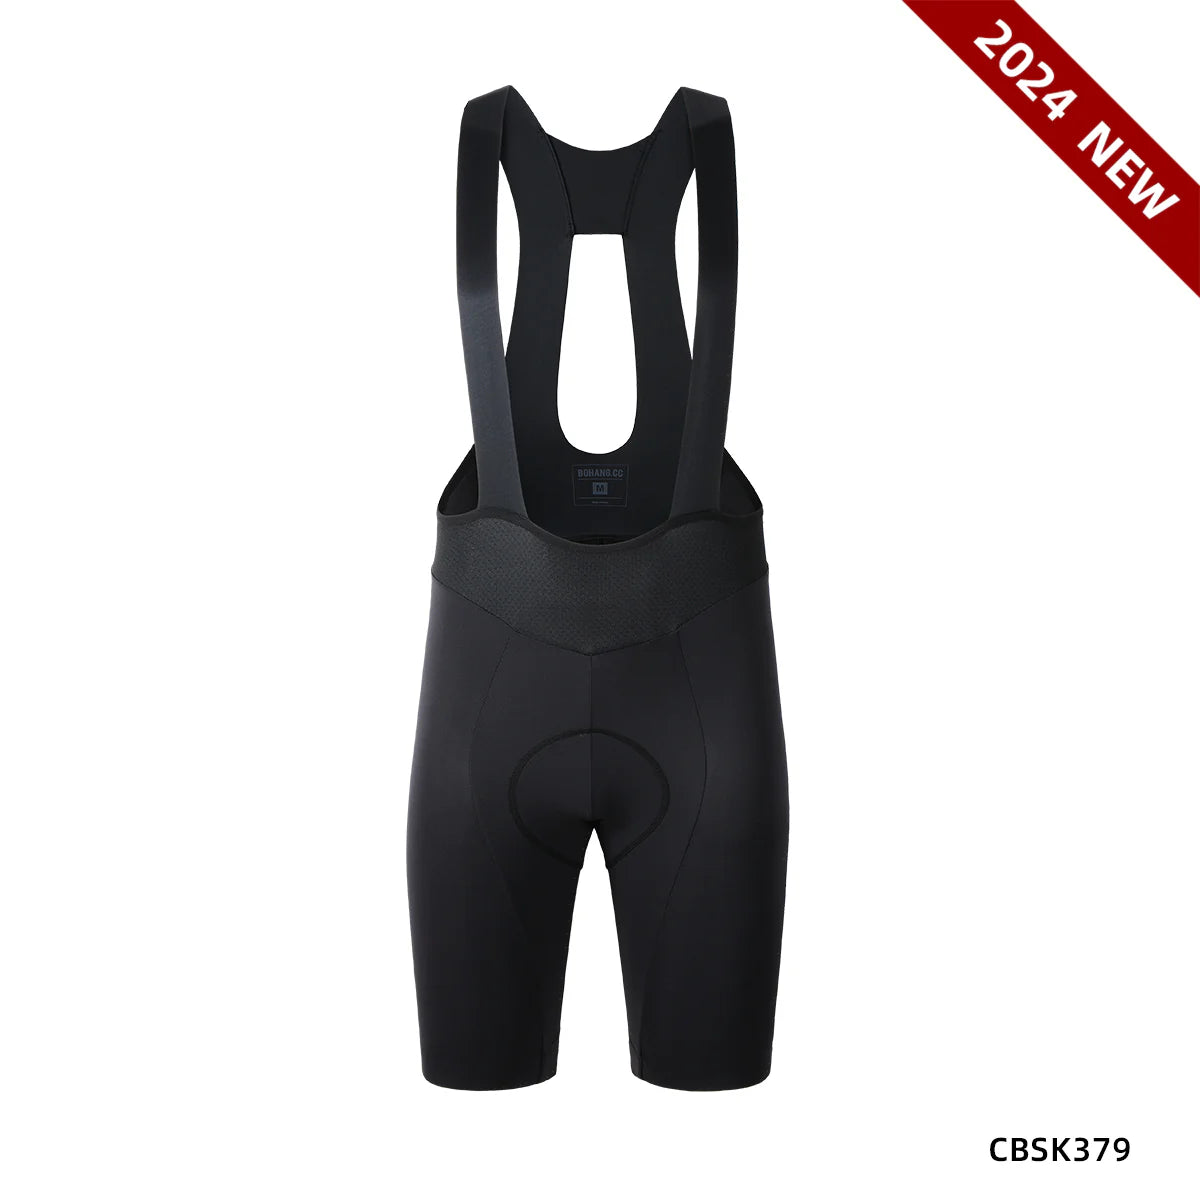 Revolutionize Your Cycling Game with MEN'S CARGO BIB SHORTS!